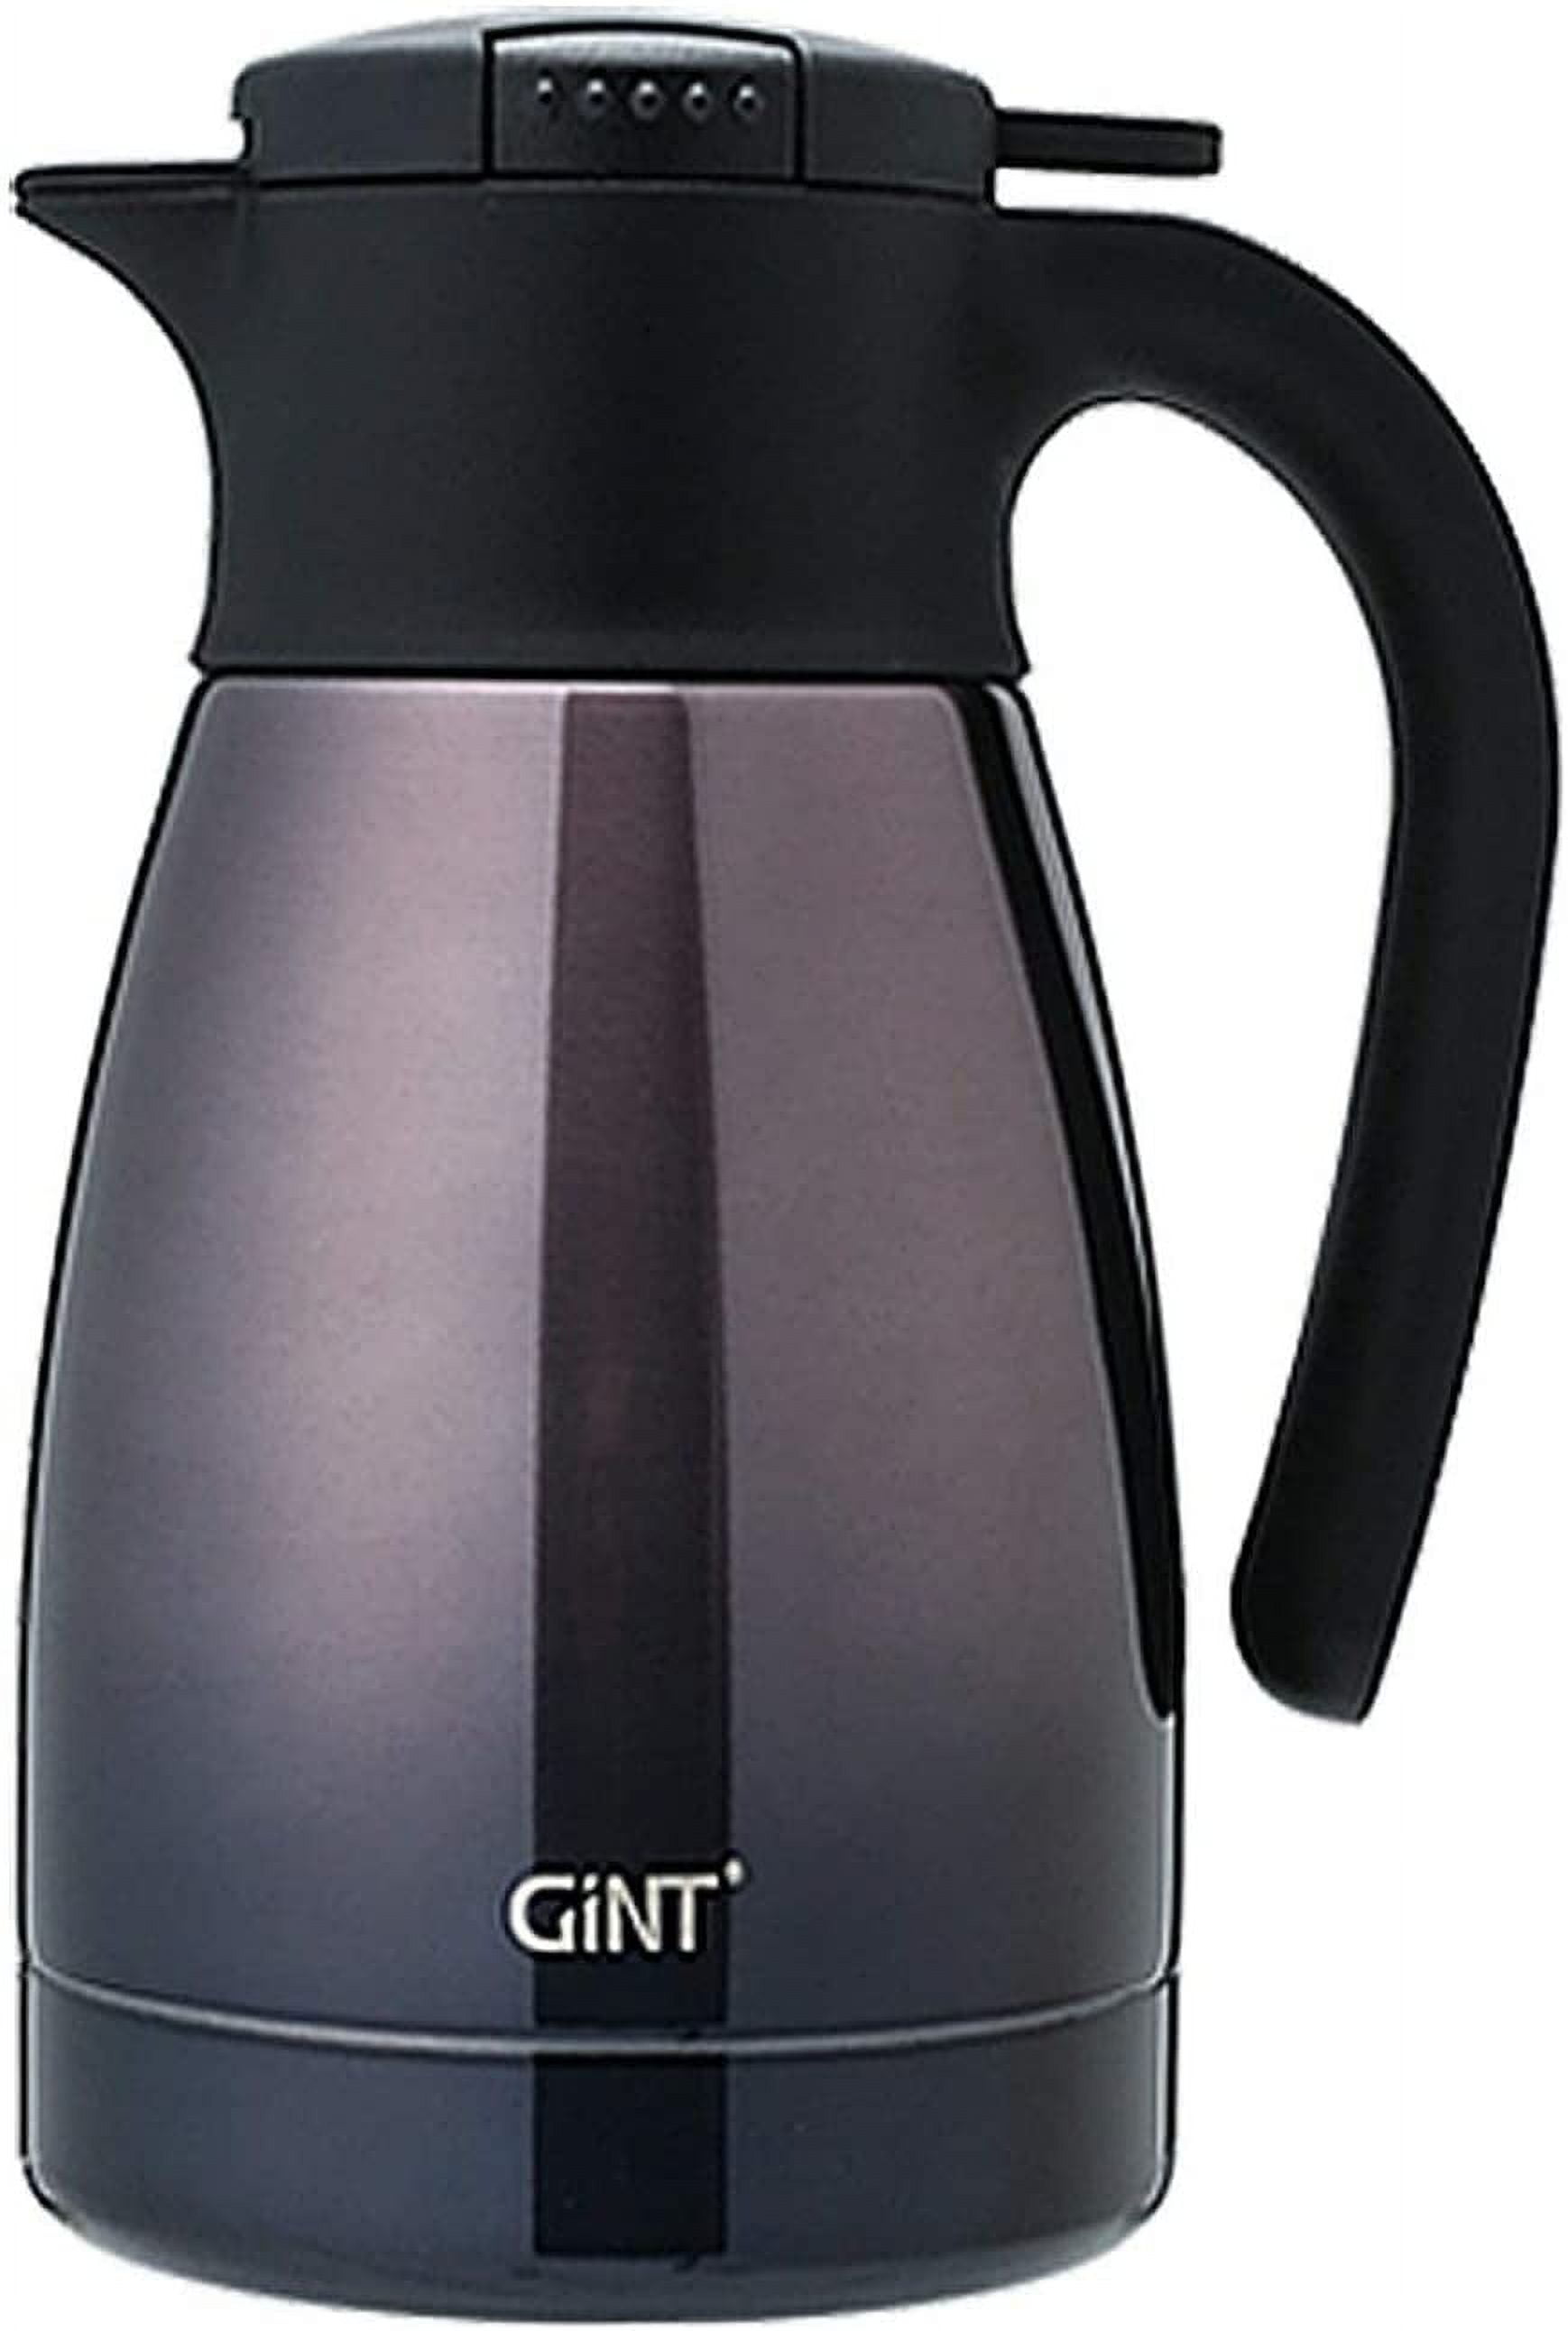 GrandTies 61oz Stainless Steel Thermal Coffee Carafe - Insulated